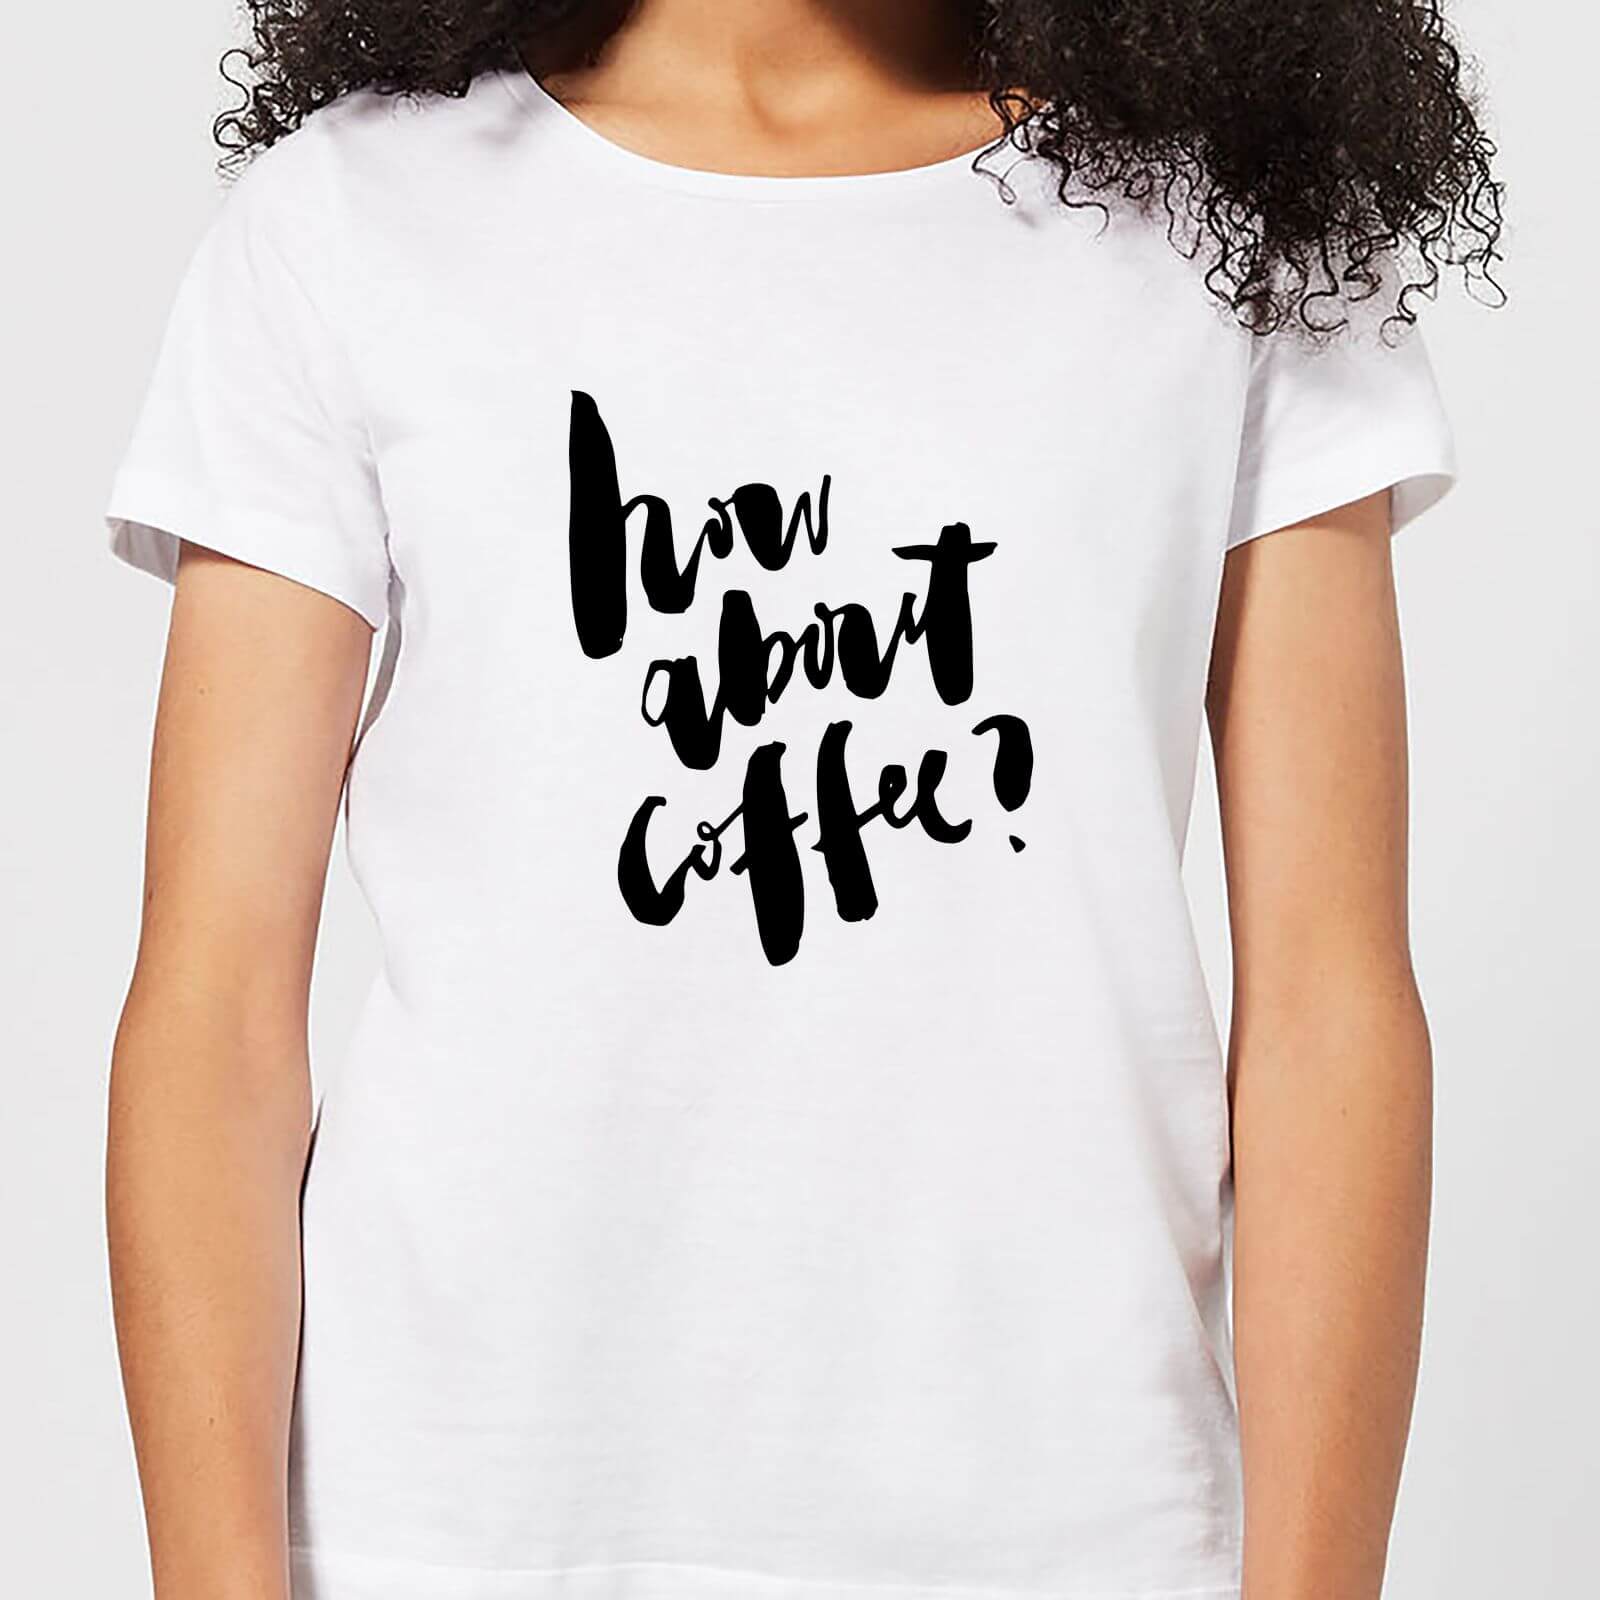 How About Coffee? Women's T-Shirt - White - S - White